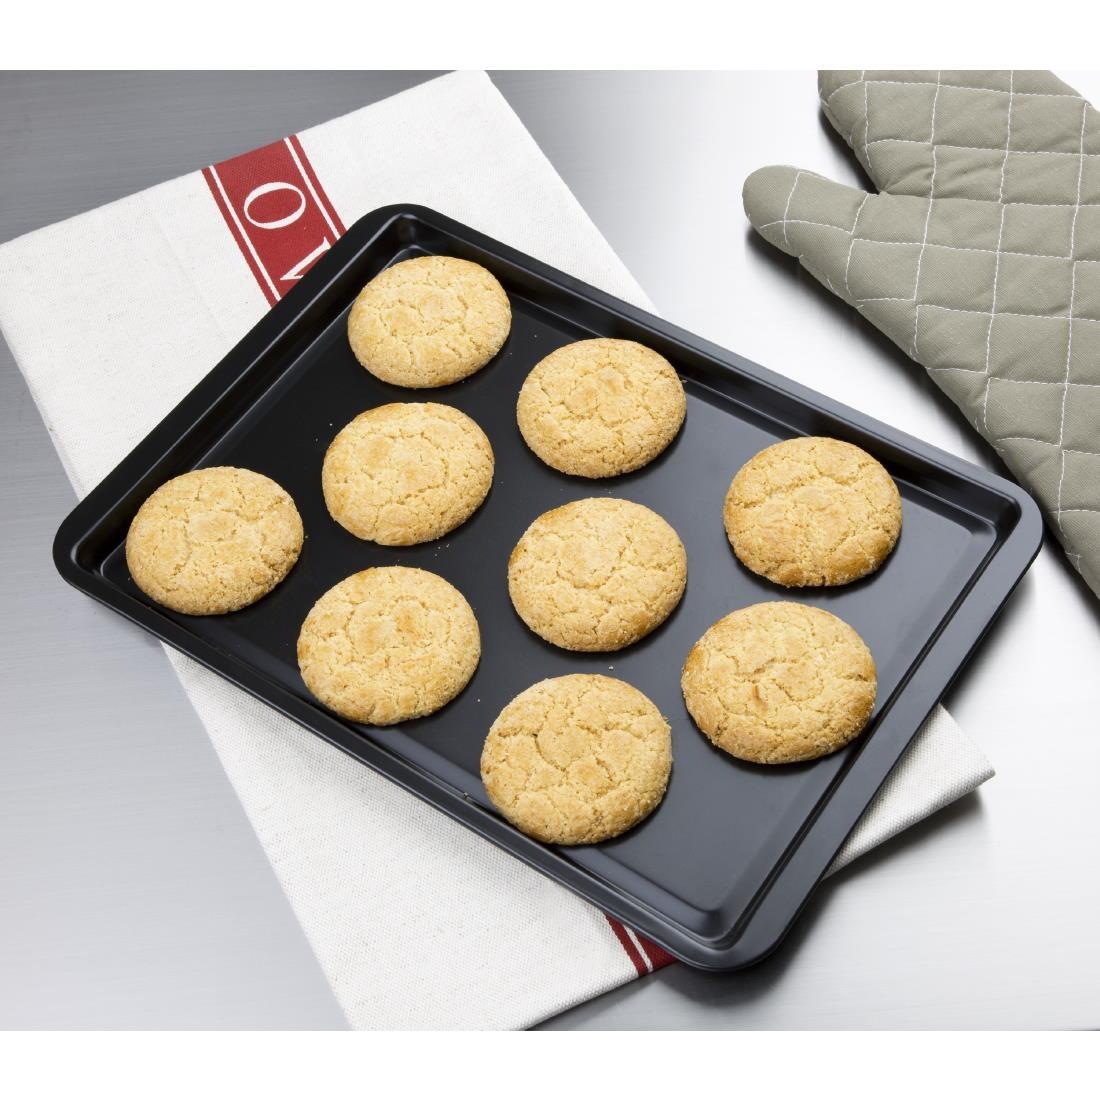 Vogue Non-Stick Carbon Steel Baking Tray 370 x 257mm - GD014  - 3